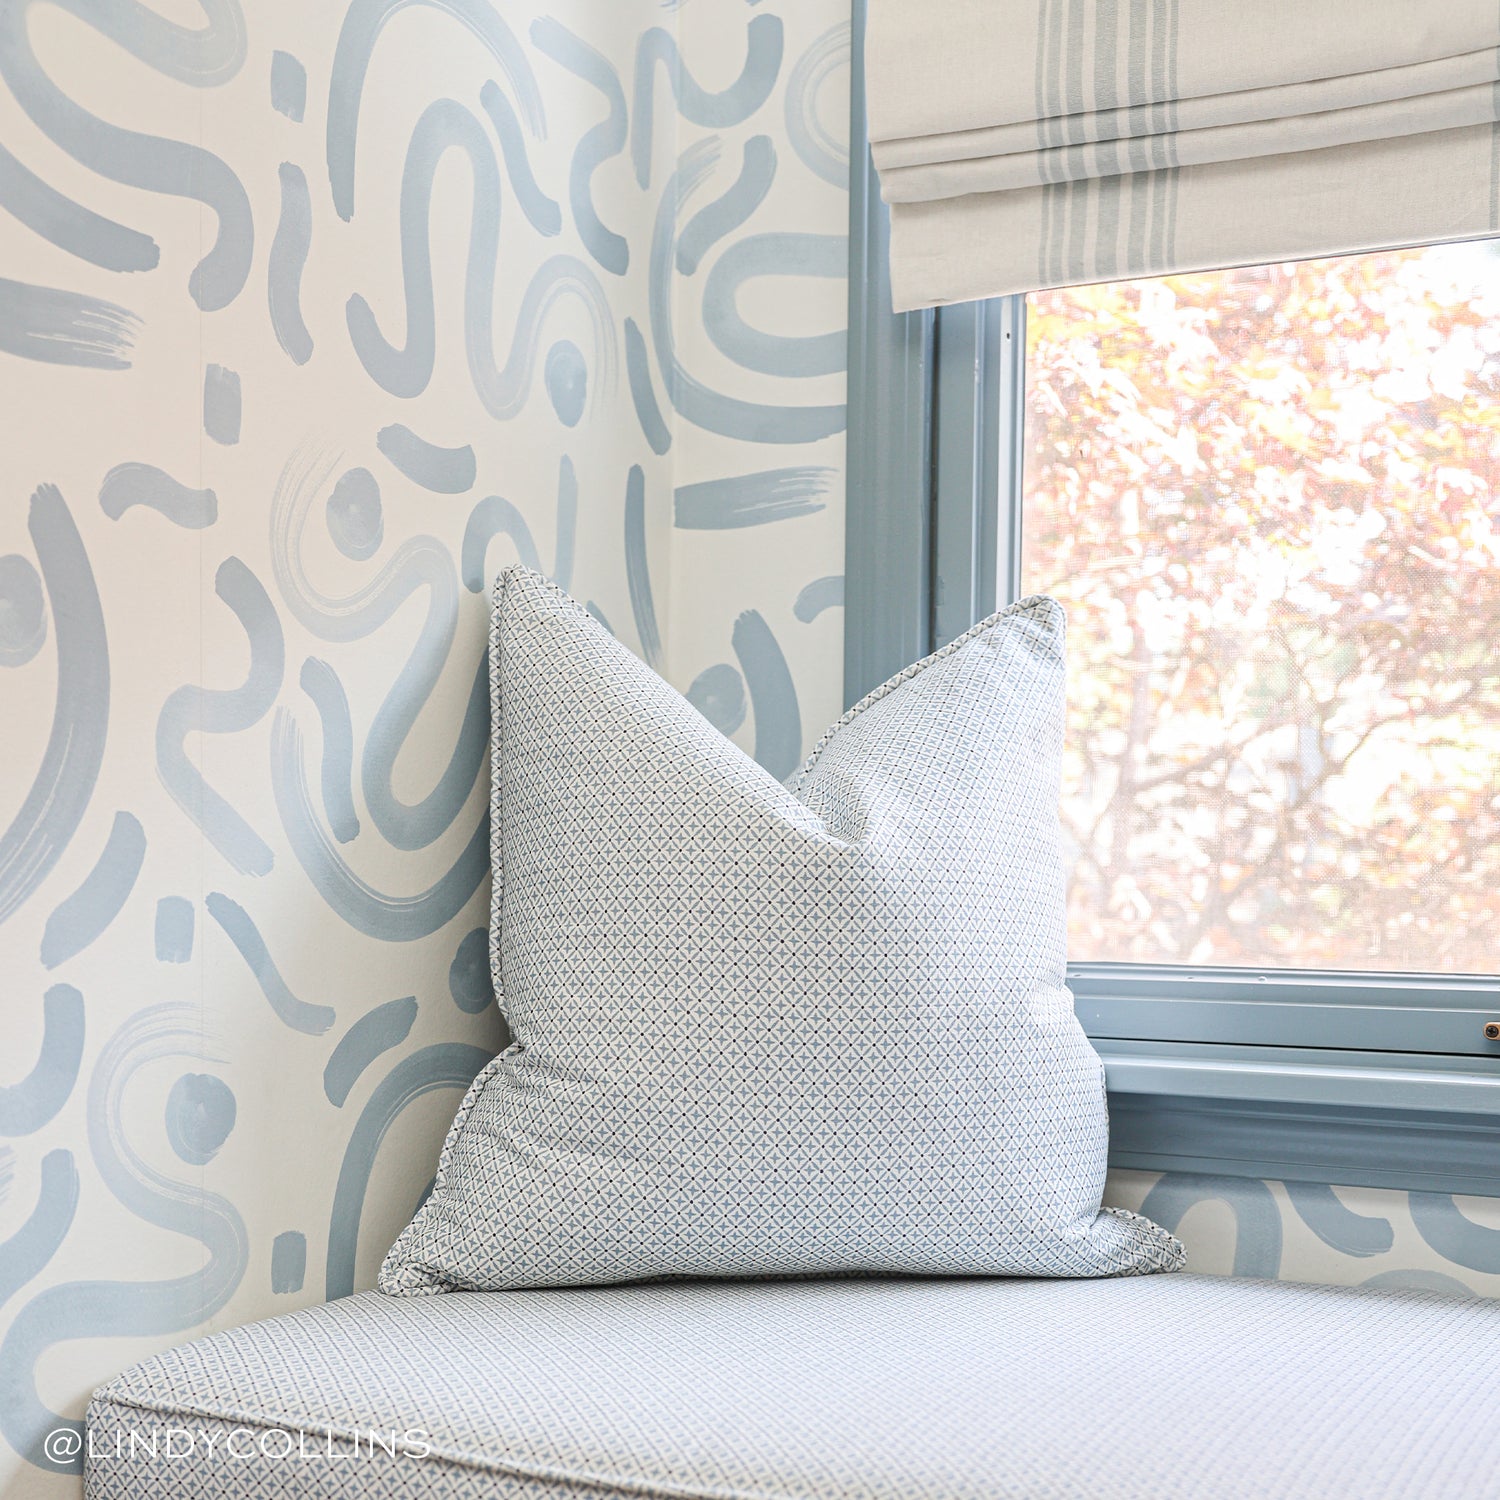 Window close-up of Sky Blue Printed Wallpaper with Blue and White Printed Pillow. Photo taken by Lindy Collins